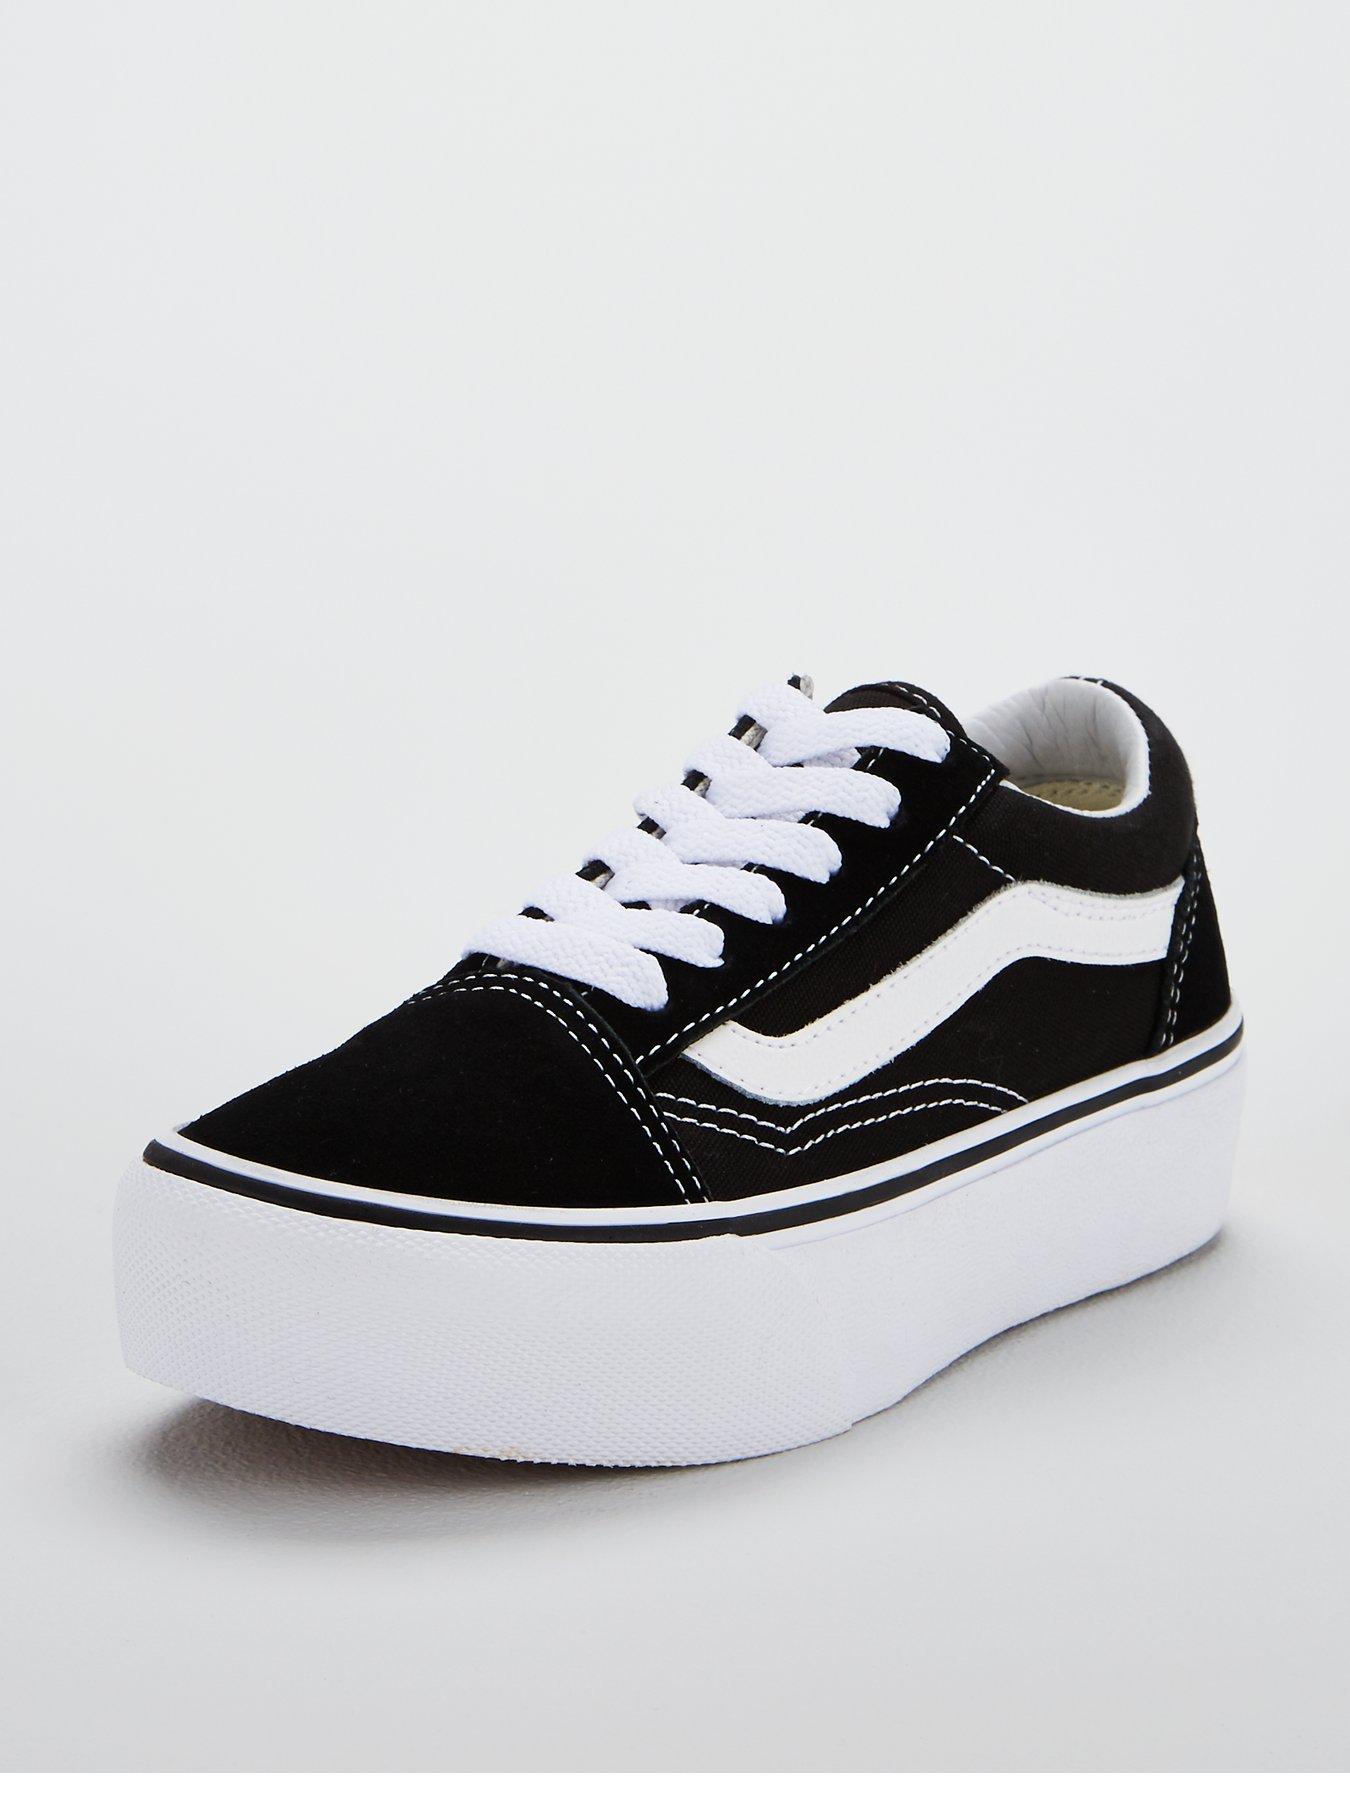 black and white vans size 3